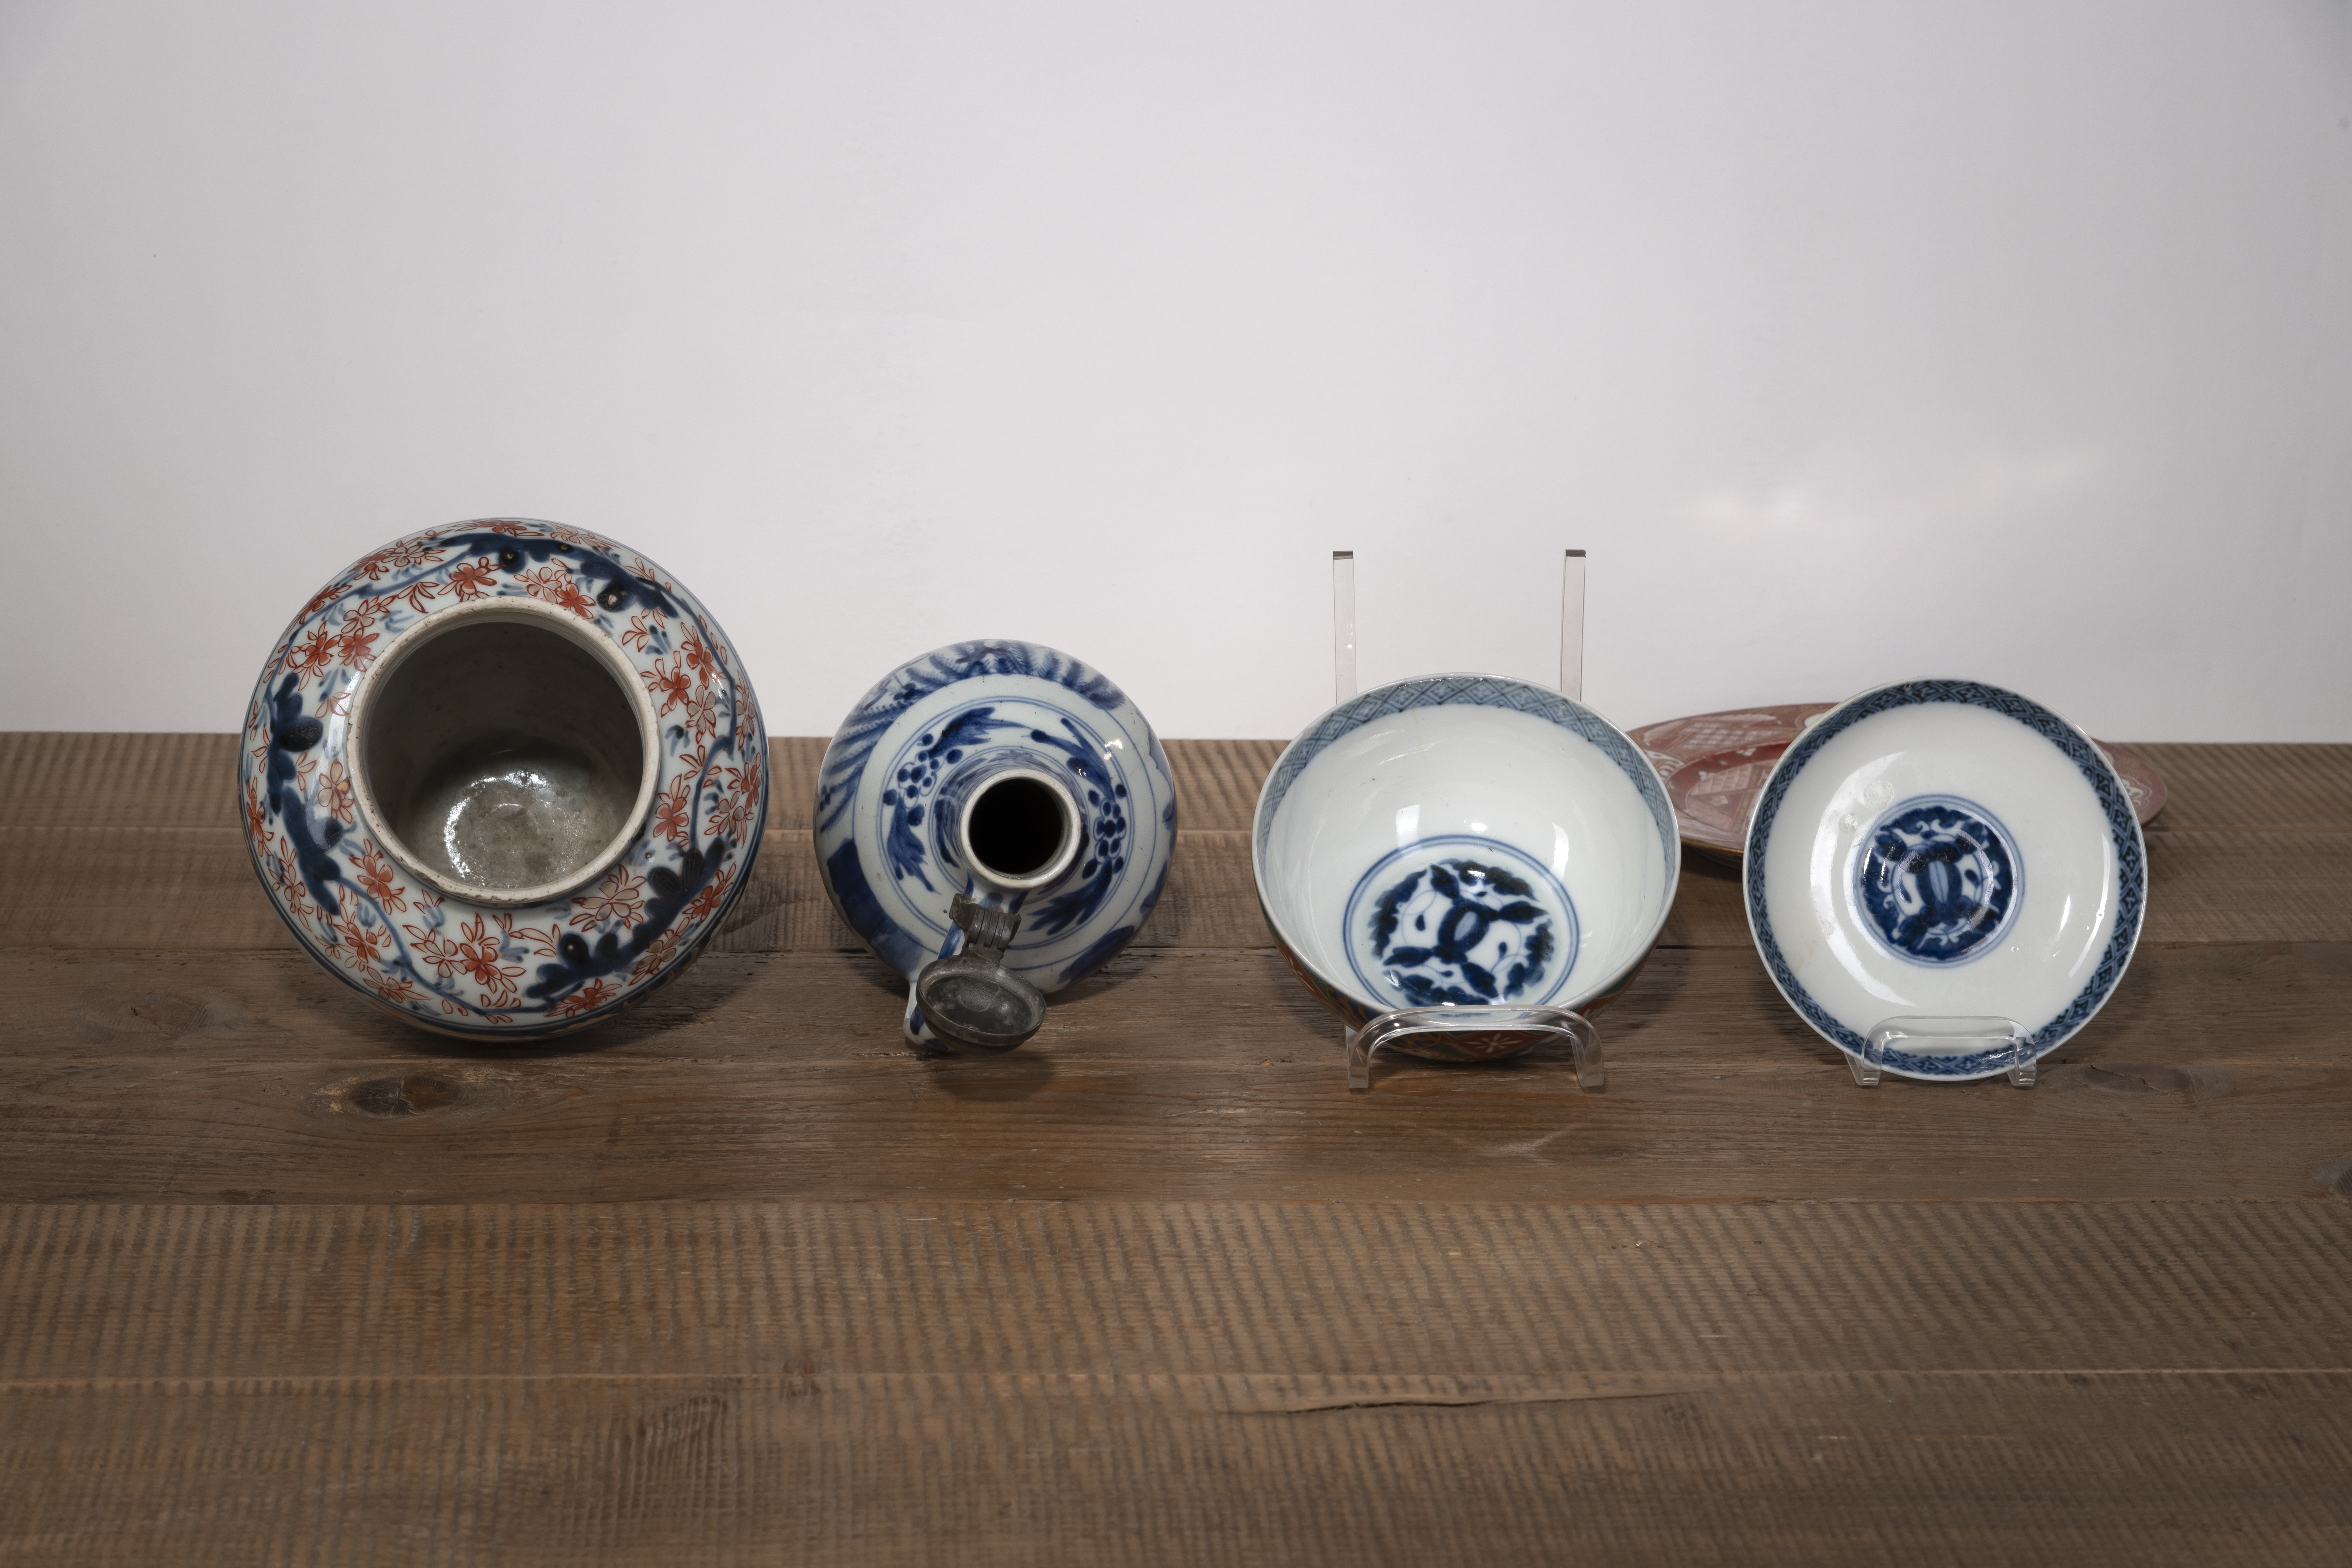 AN 'IMARI' BOWL AND COVER, A VASE, A 'KUTANI' DISH, AND AN 'ARITA' BLUE AND WHITE PORCELAIN EWER - Image 4 of 5